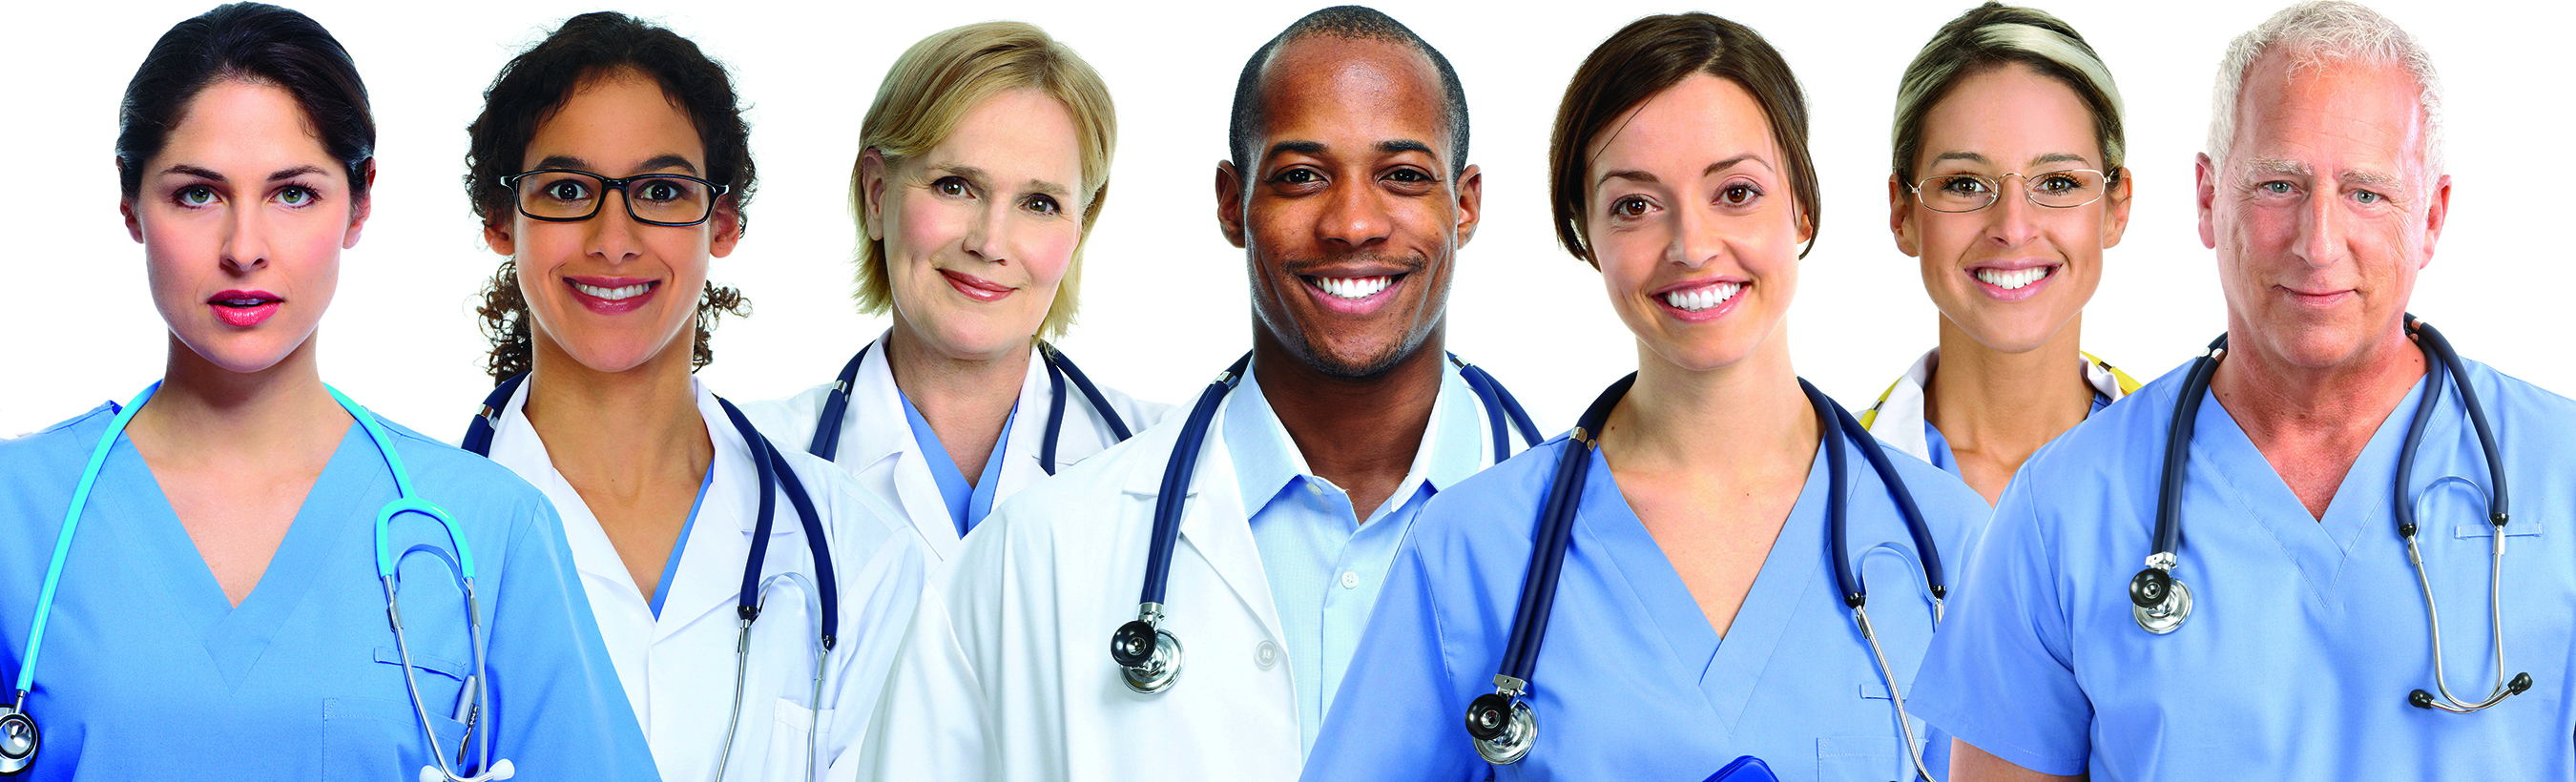 Medical Care Workers